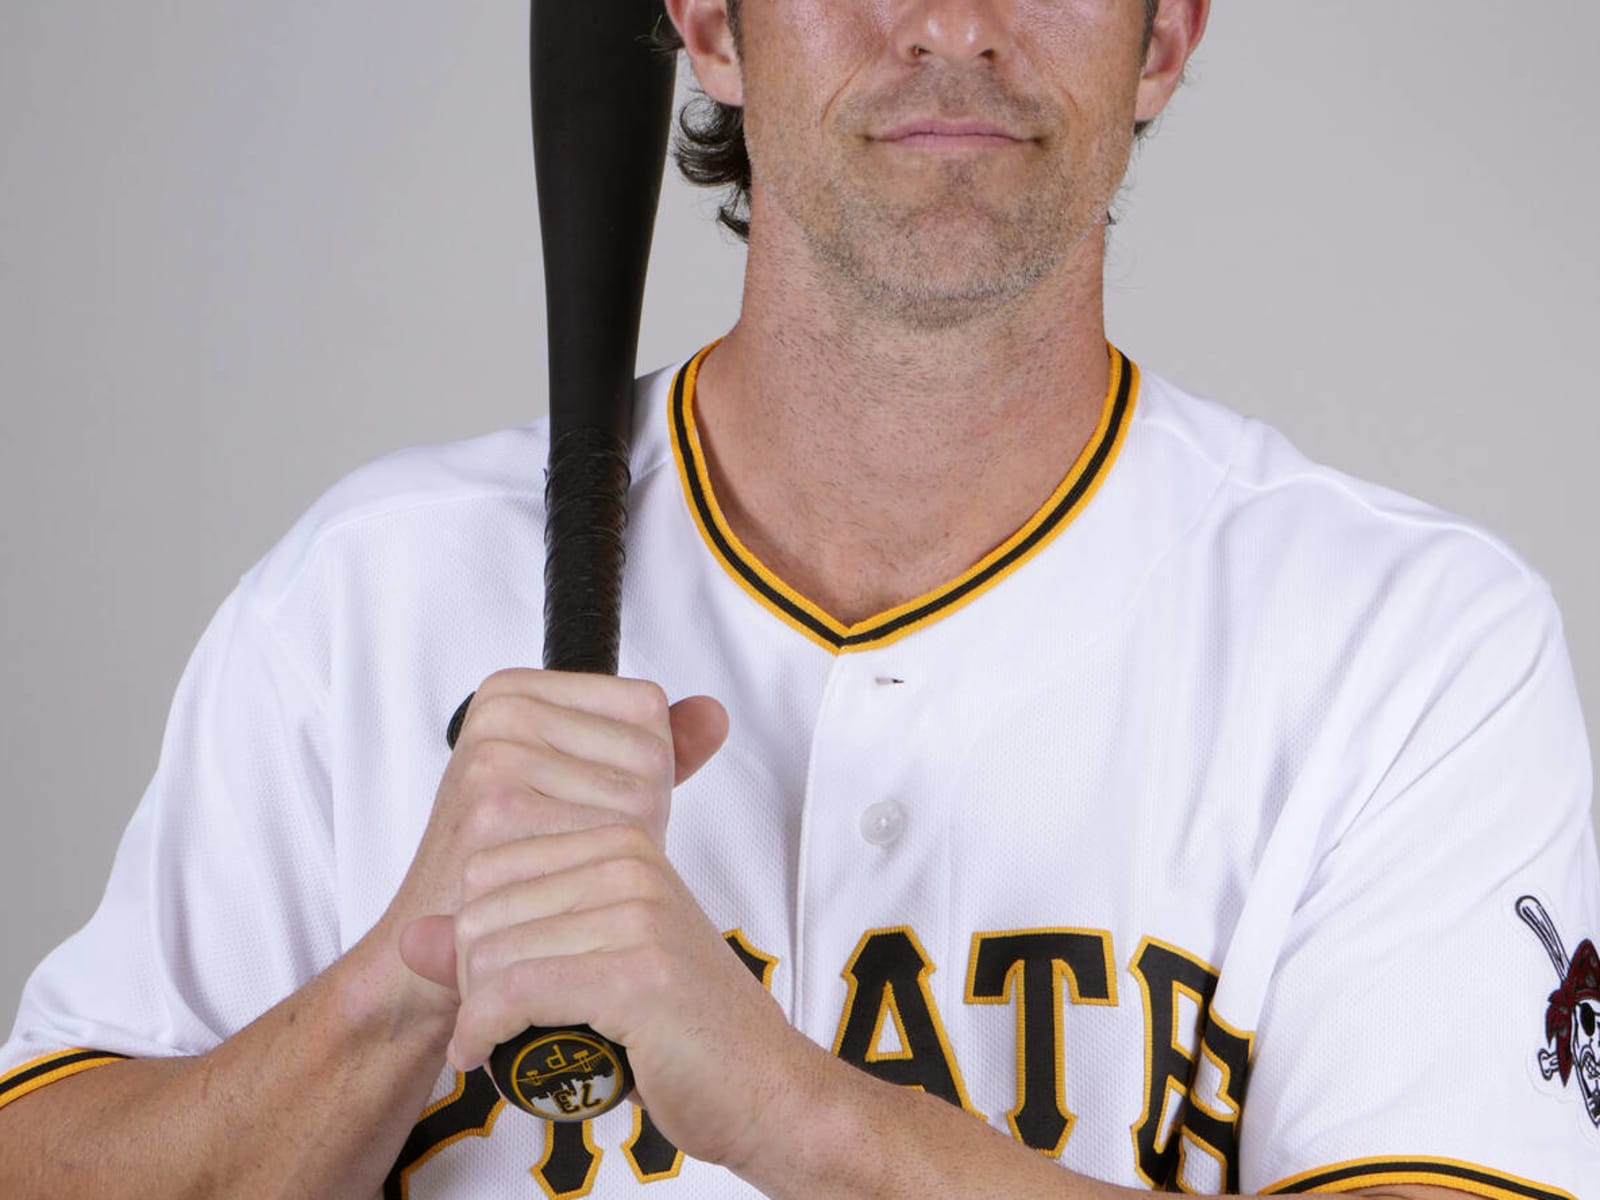 Drew Maggi, 33, gets MLB opportunity with Pirates after 13 minor